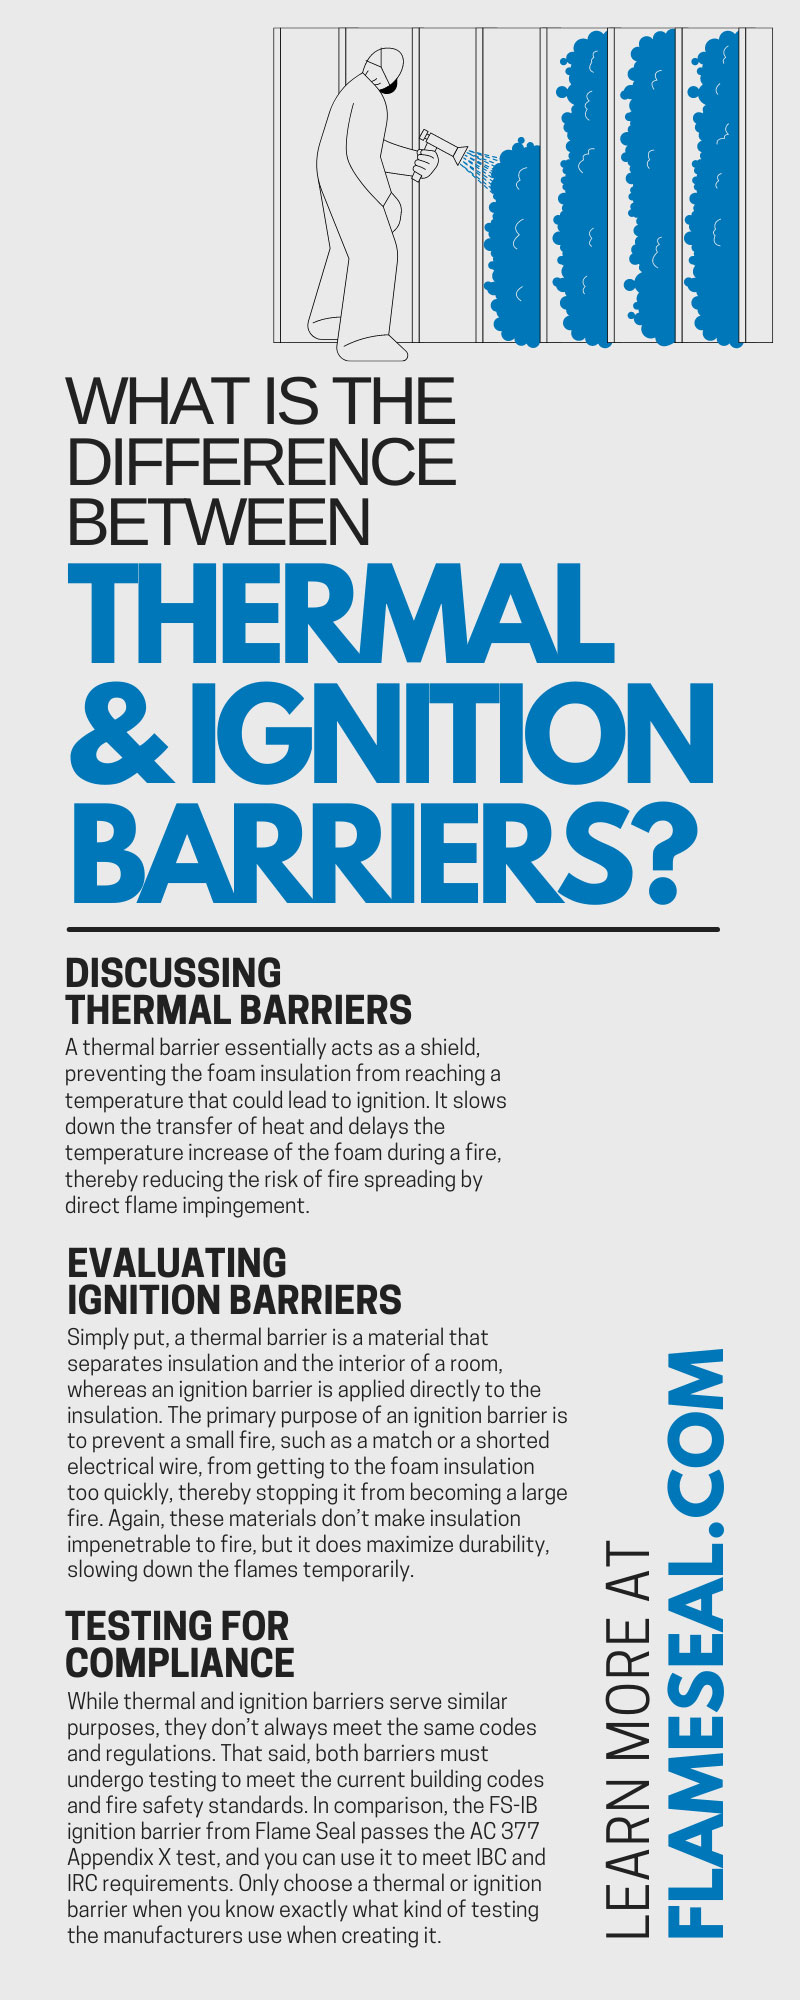 What Is the Difference Between Thermal & Ignition Barriers?